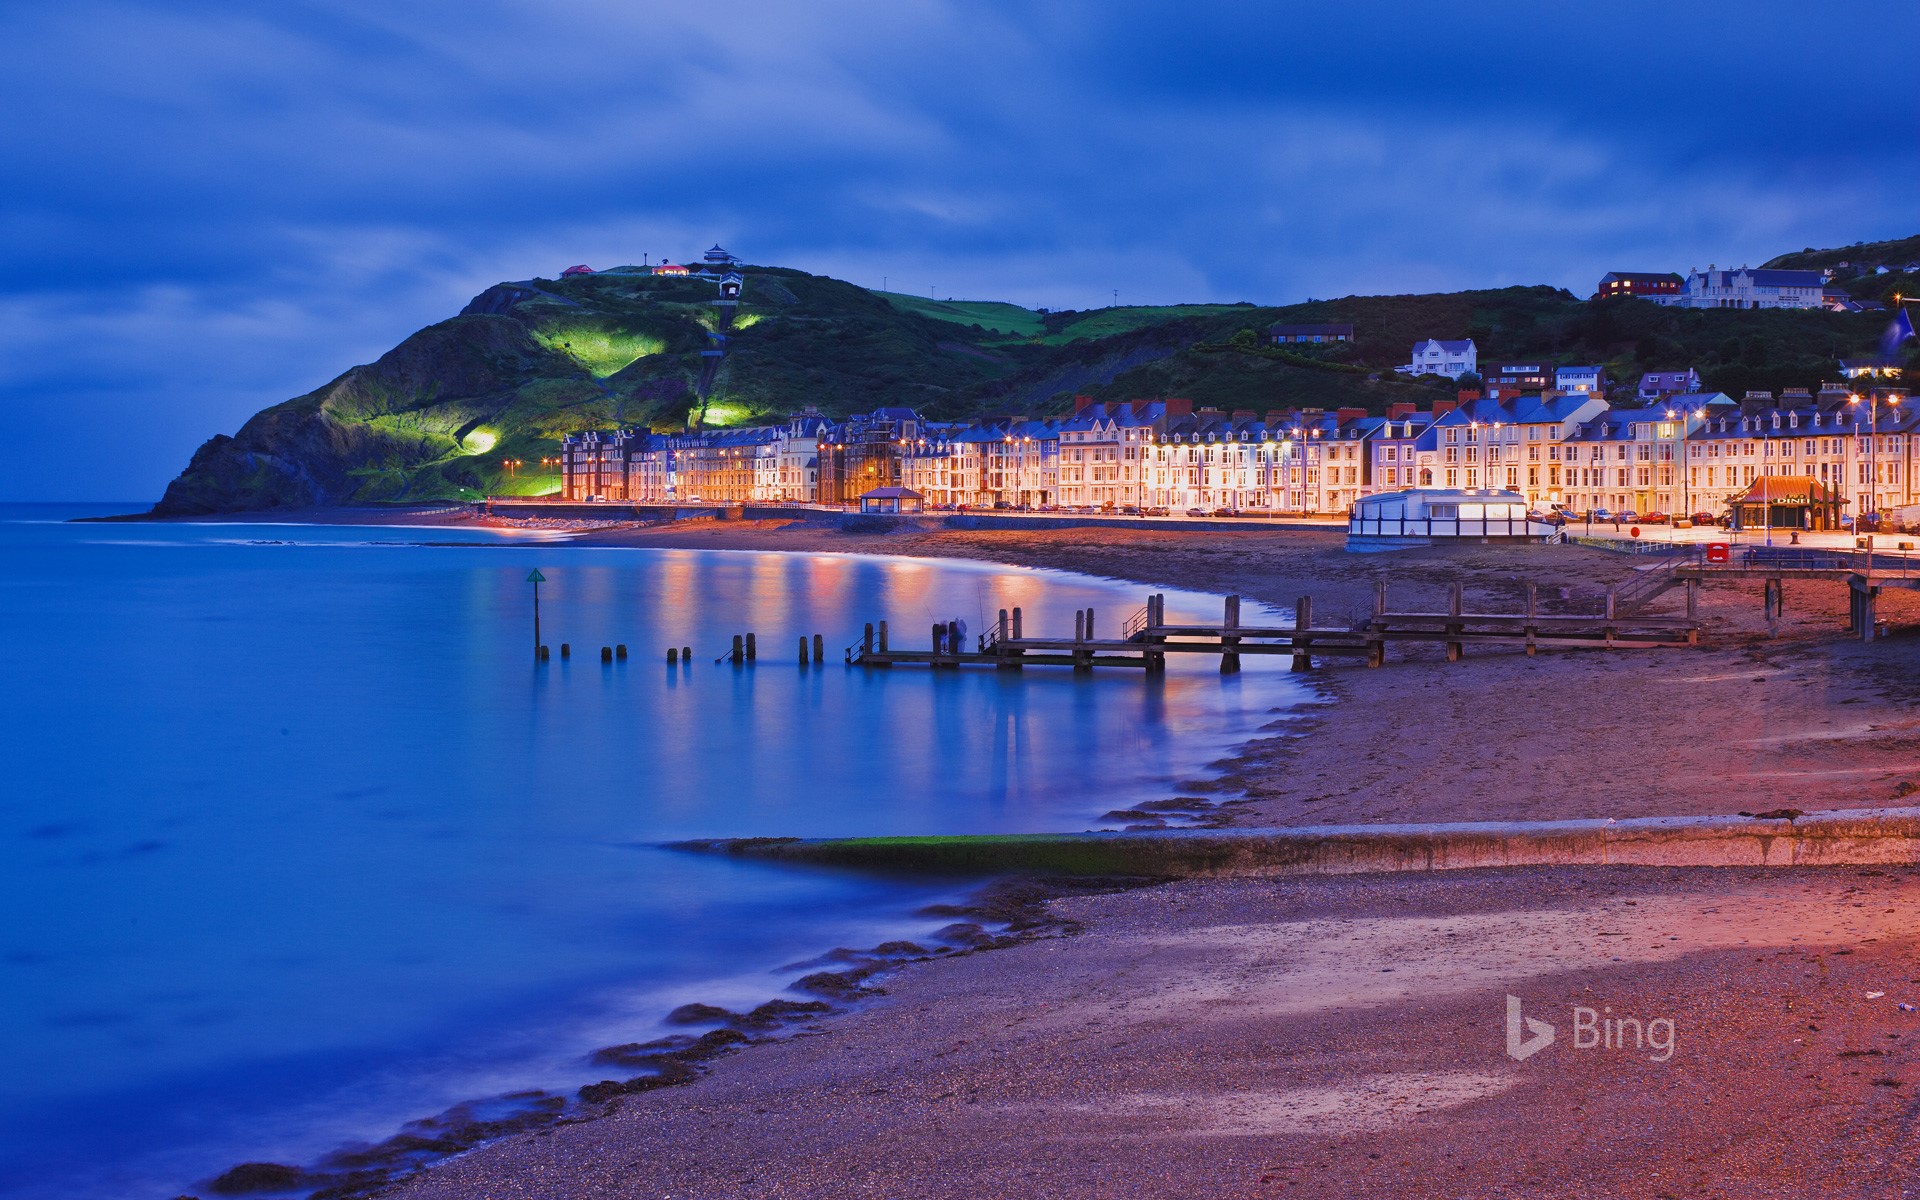 The seafront and promenade of Aberystwyth in Ceredigion, Wales